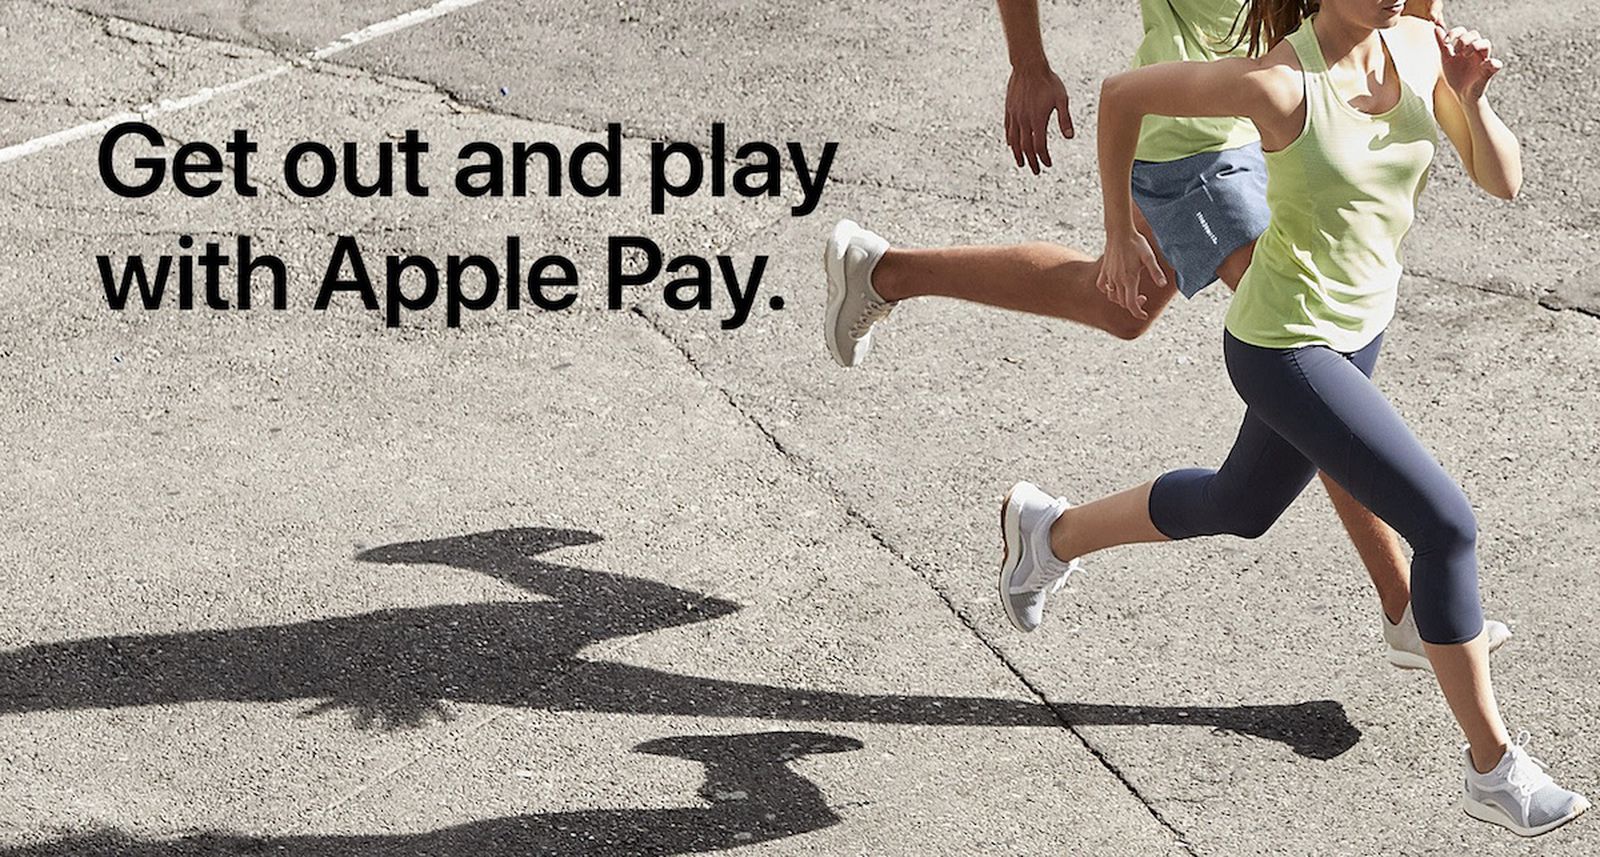 Apple Pay Promo 15% Off Orders Placed in the App Through June 28 - MacRumors